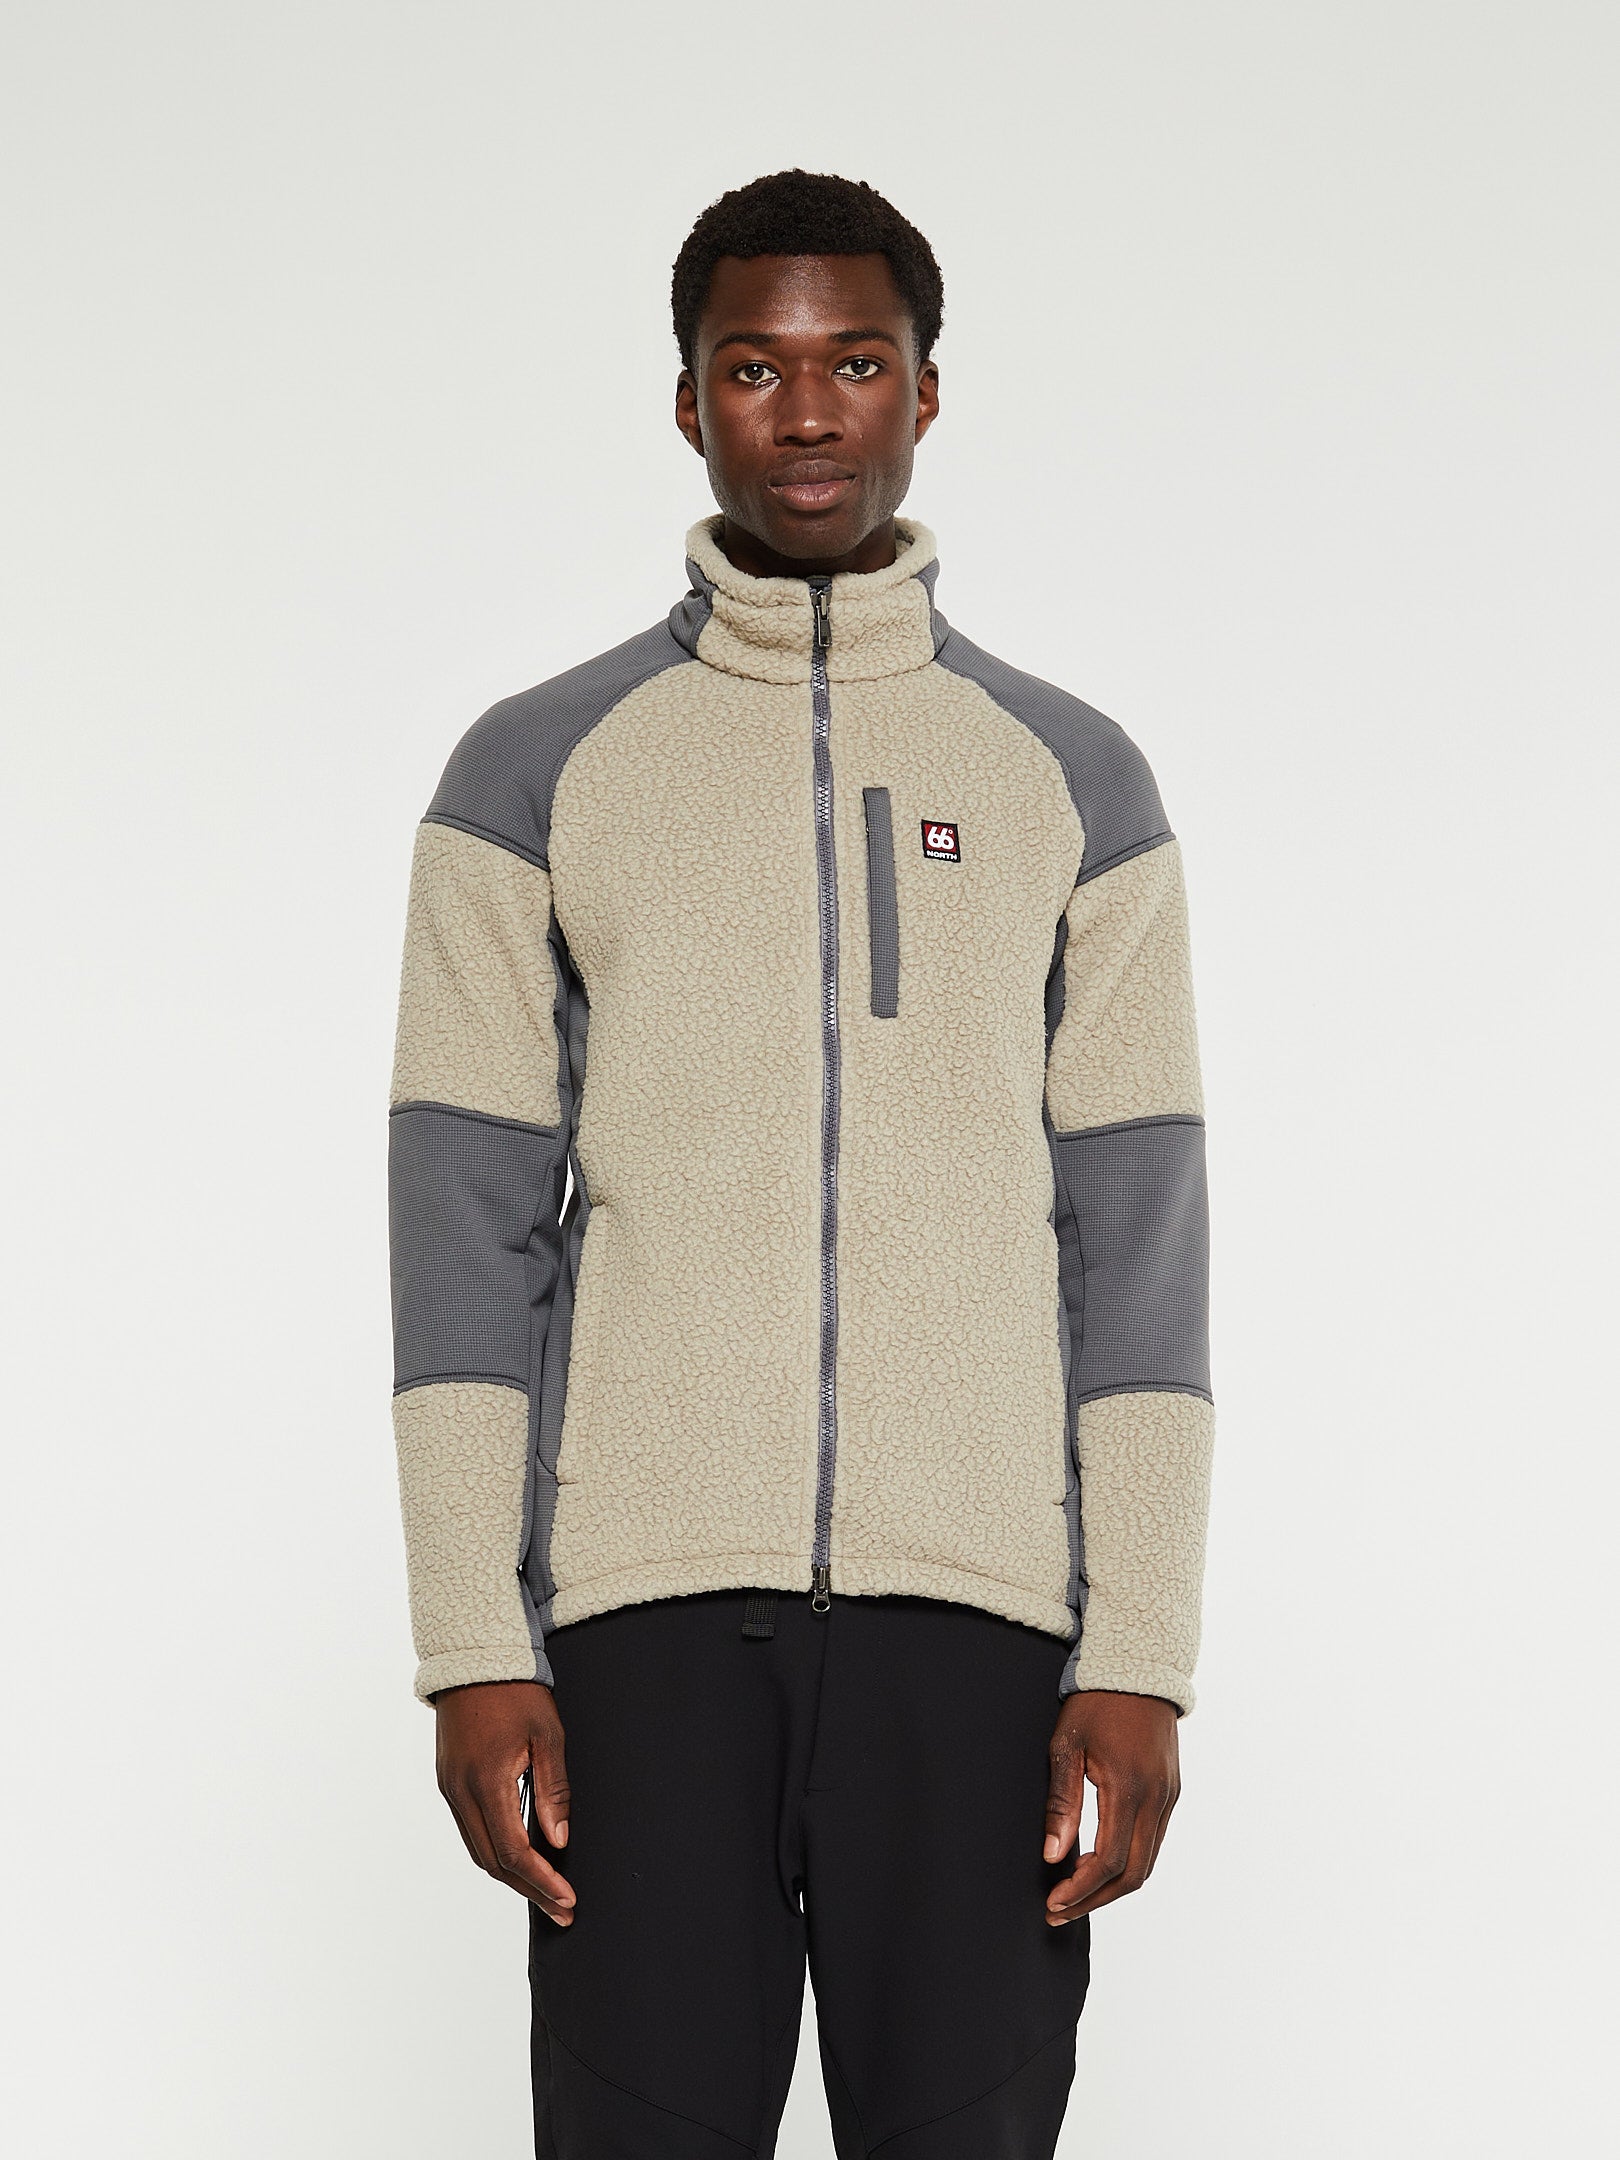 66 NORTH - Tindur Technical Shearling Jacket in Dry Moss